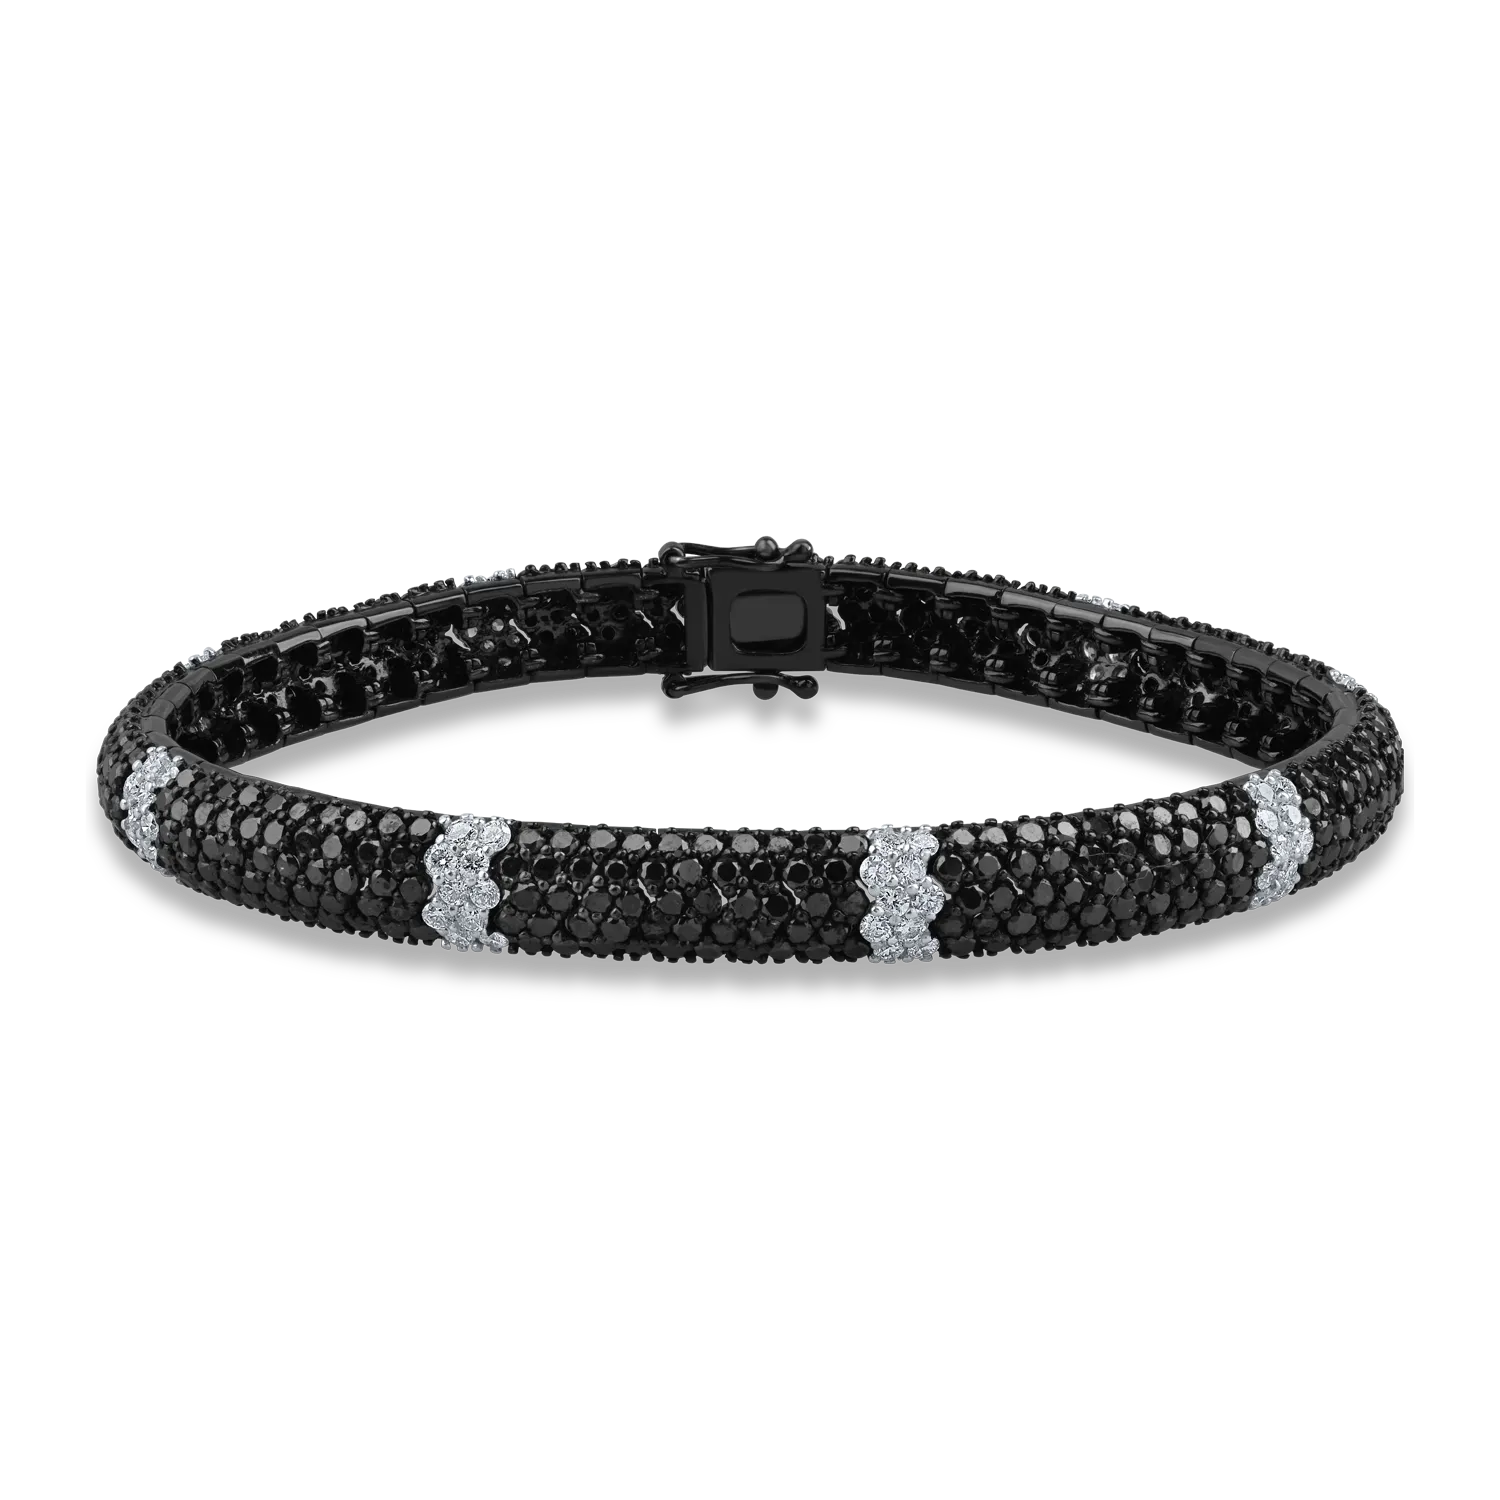 White gold tennis bracelet with 7.62ct black diamonds and 1.5ct clear diamonds